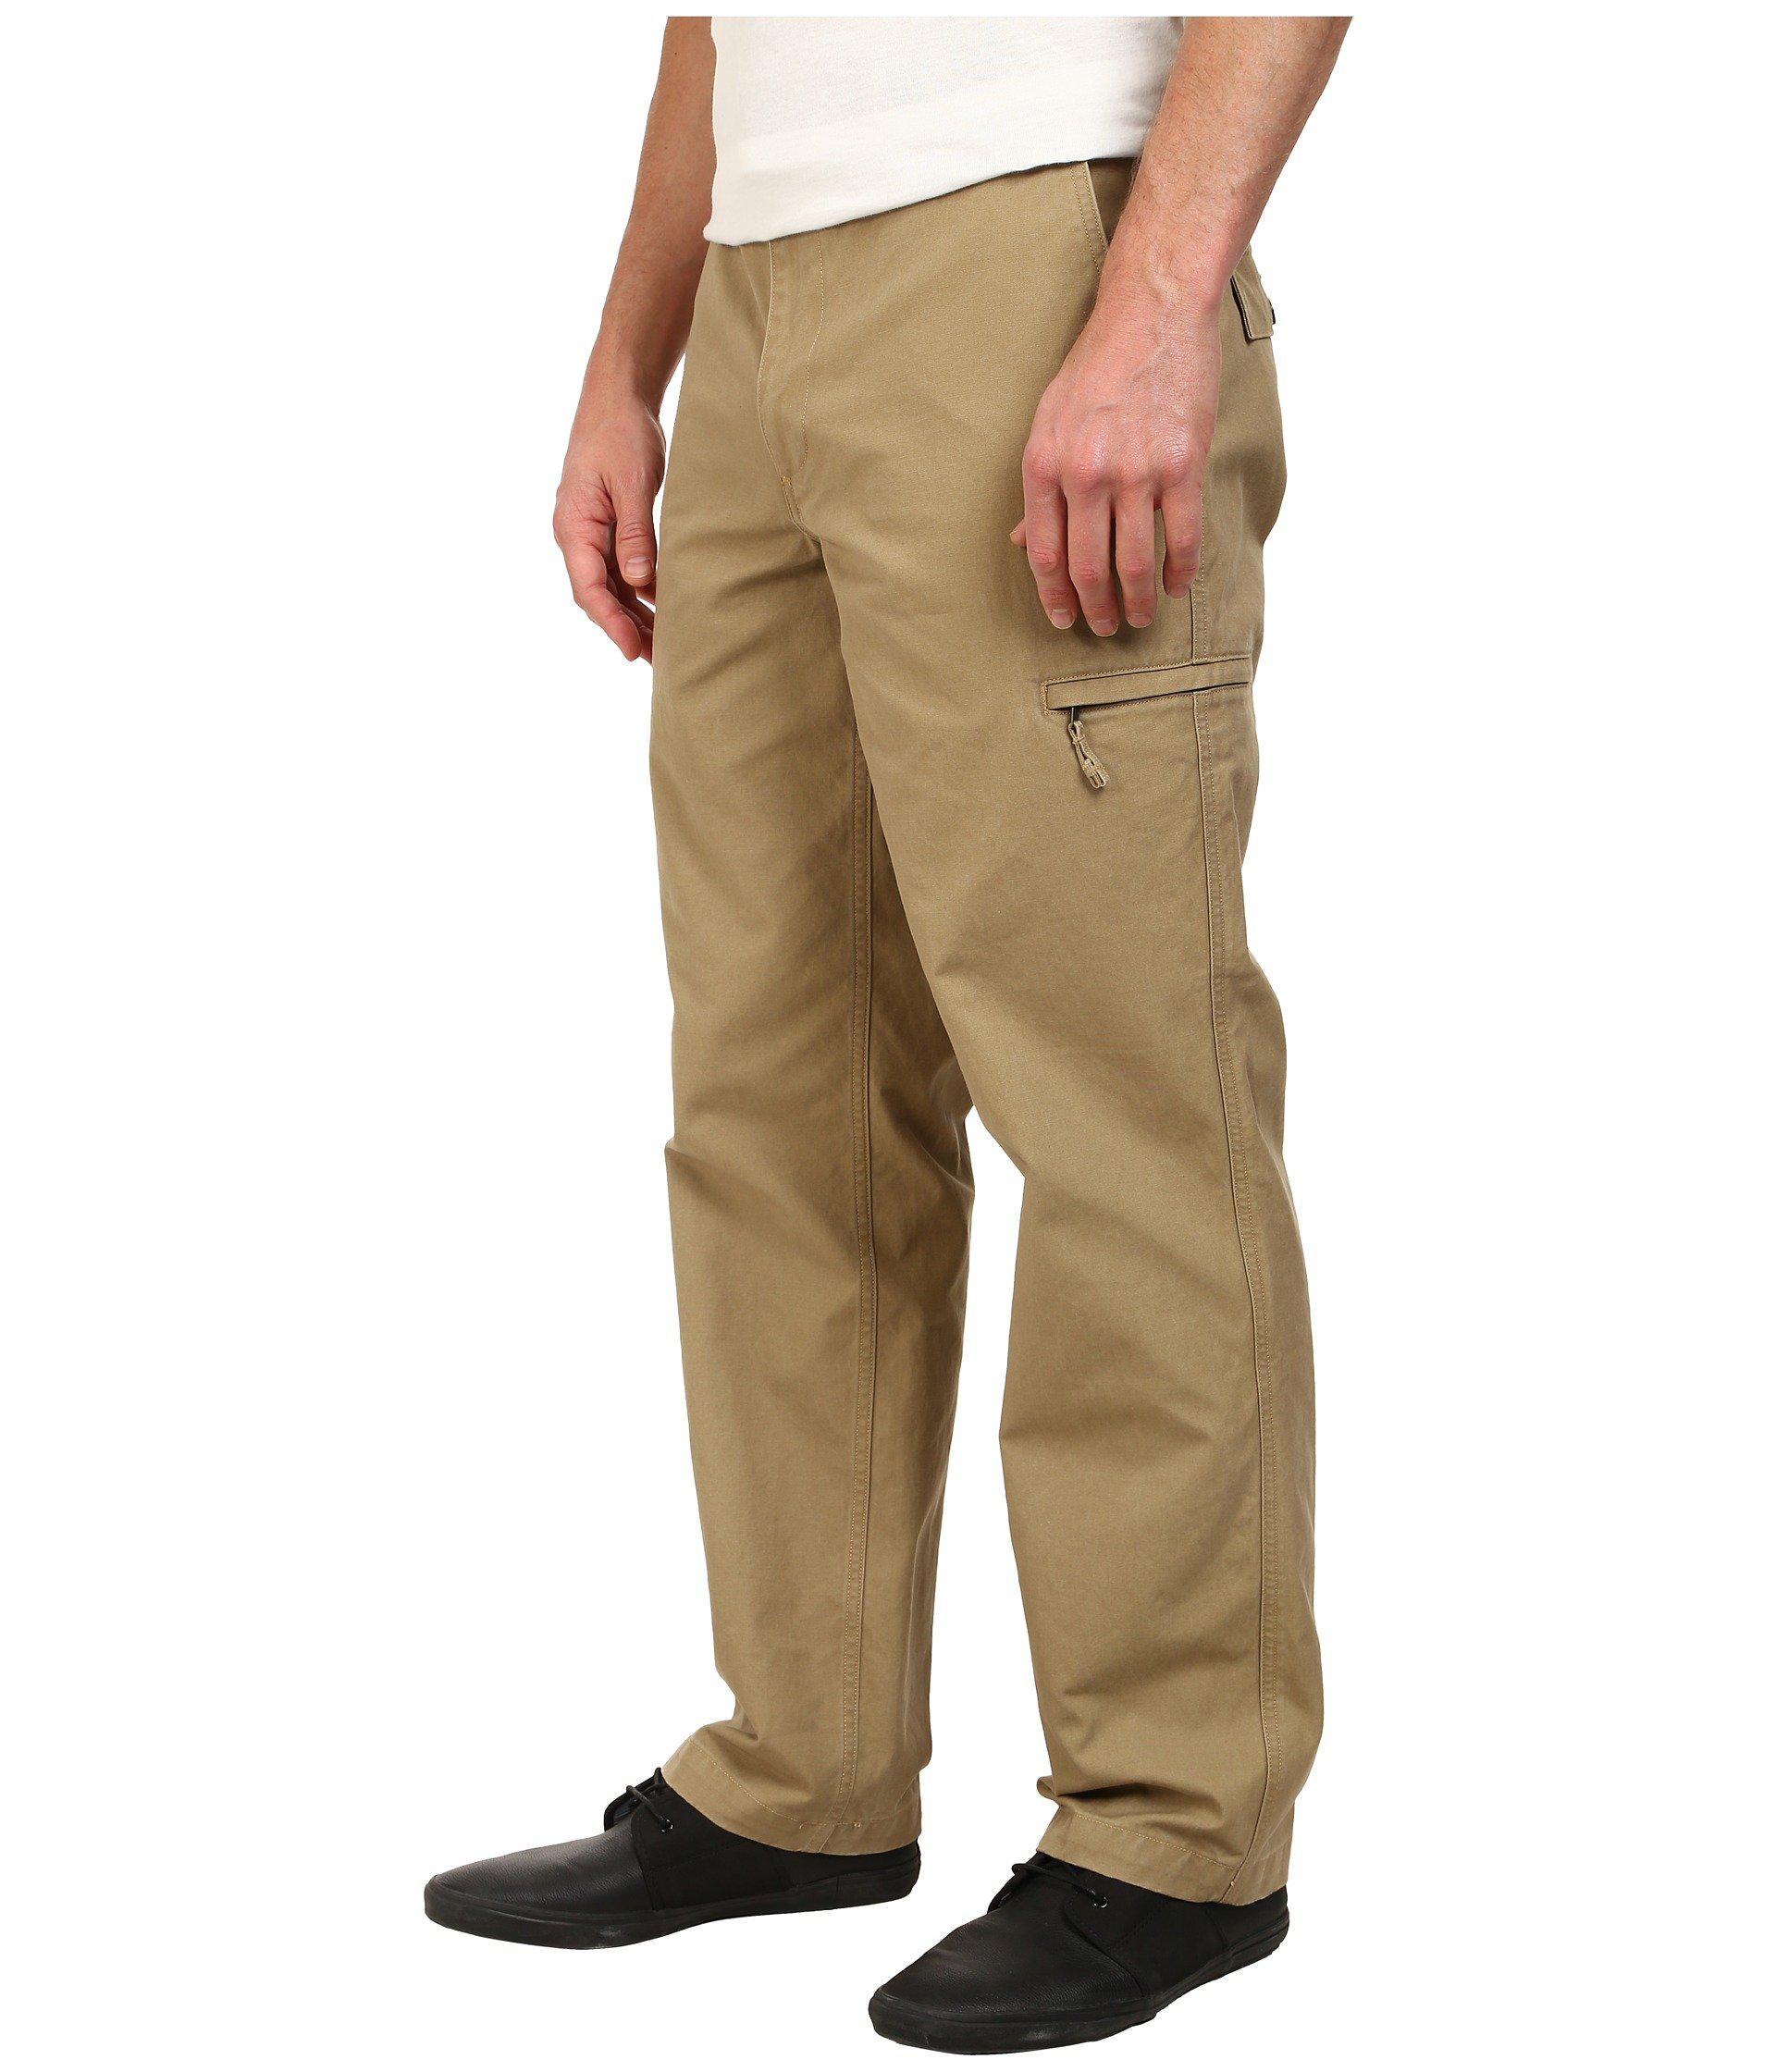 crossover cargo pants